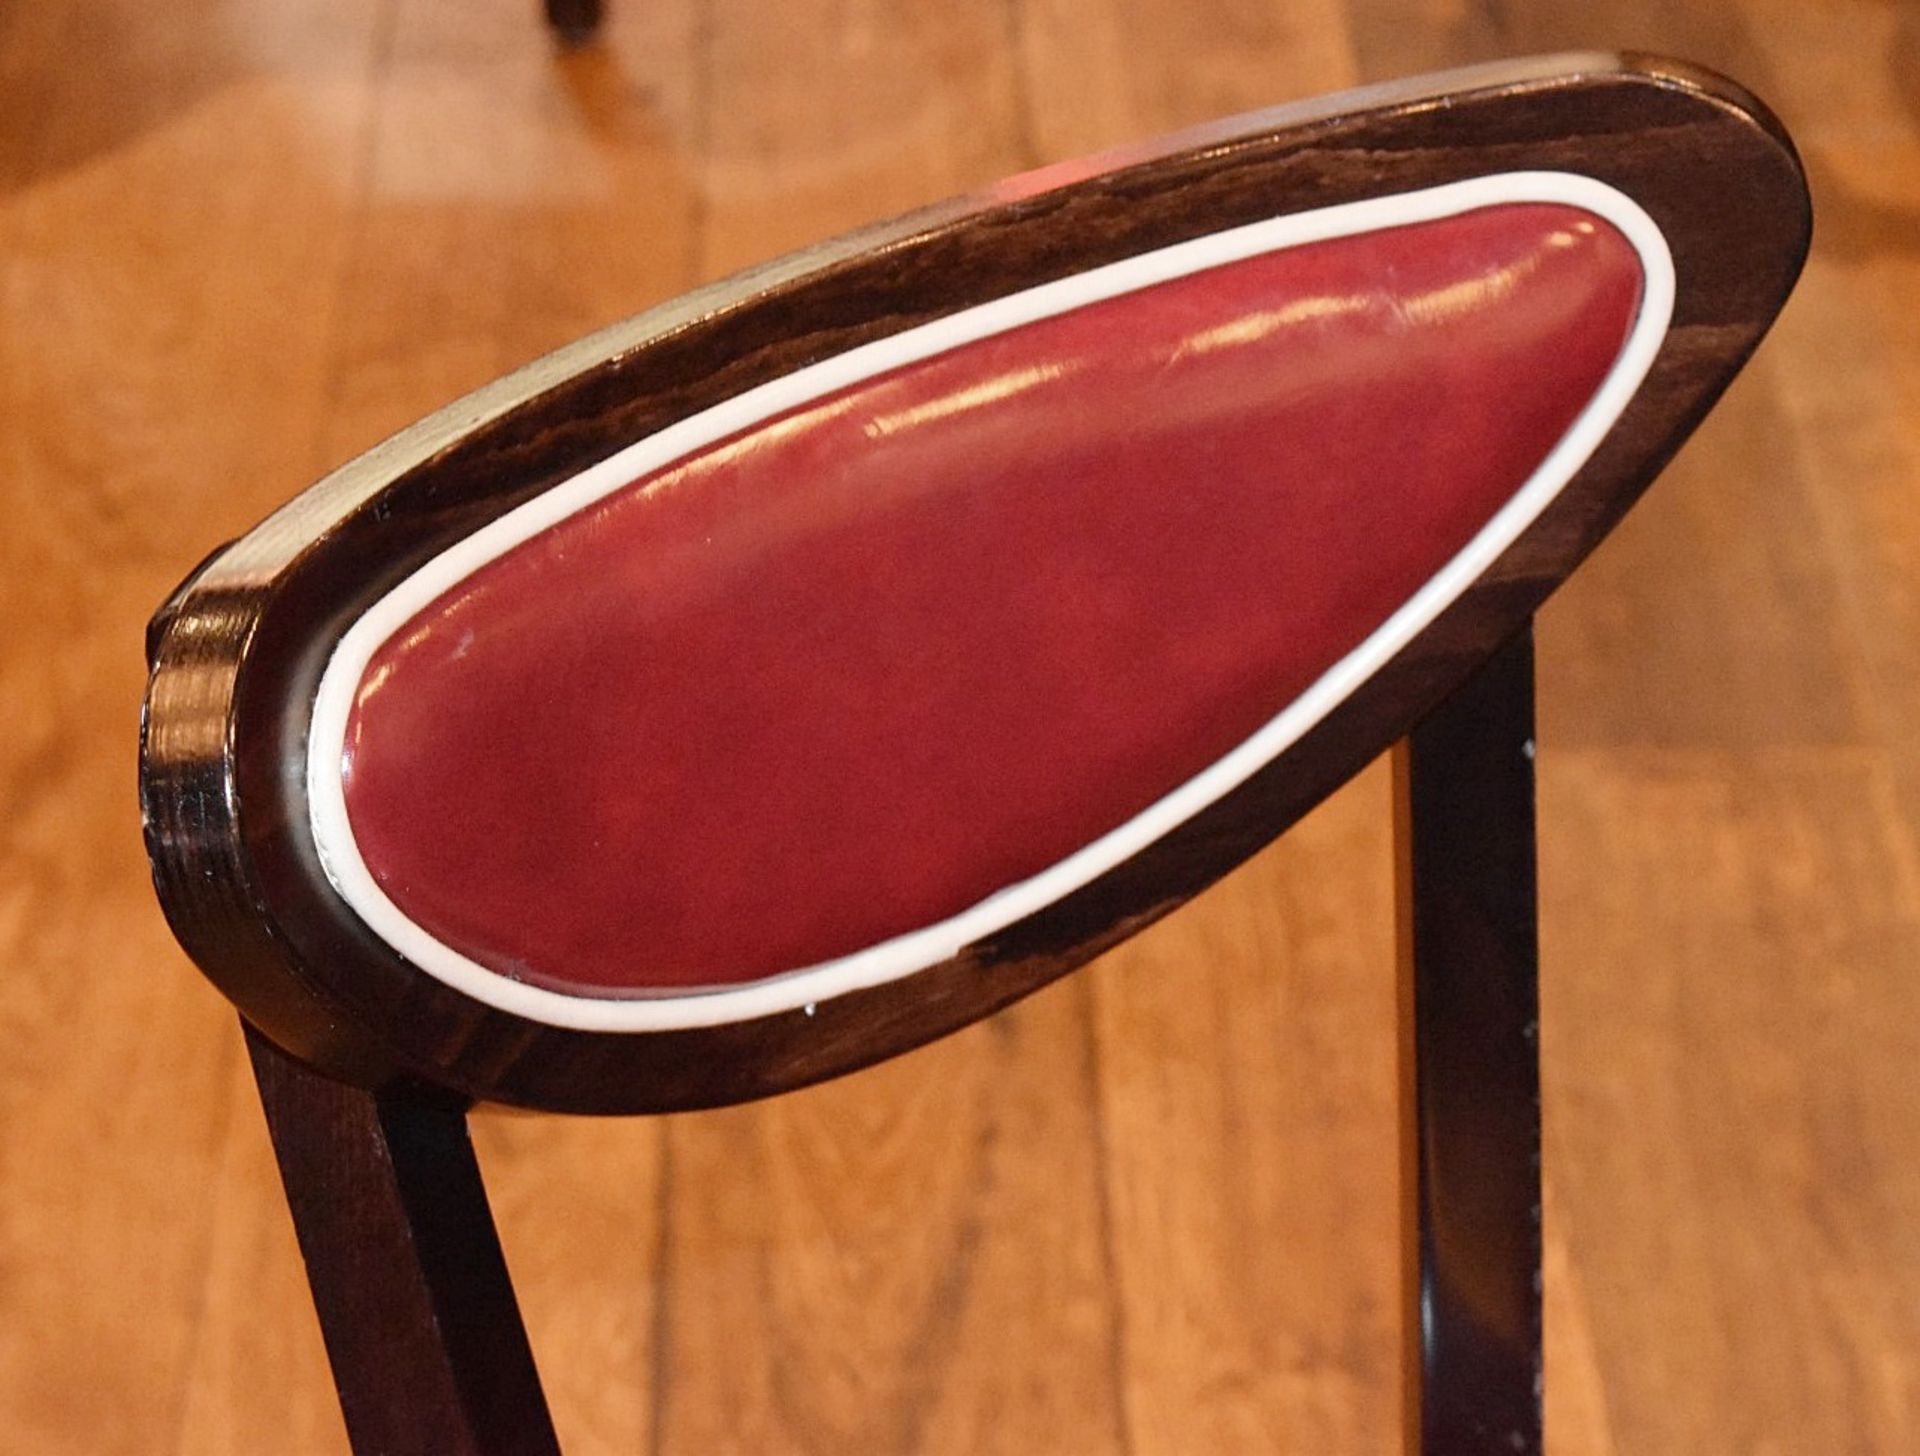 8 x Wine Red Faux Leather Dining Chairs From Italian American Restaurant - Retro Design With Dark - Image 4 of 4